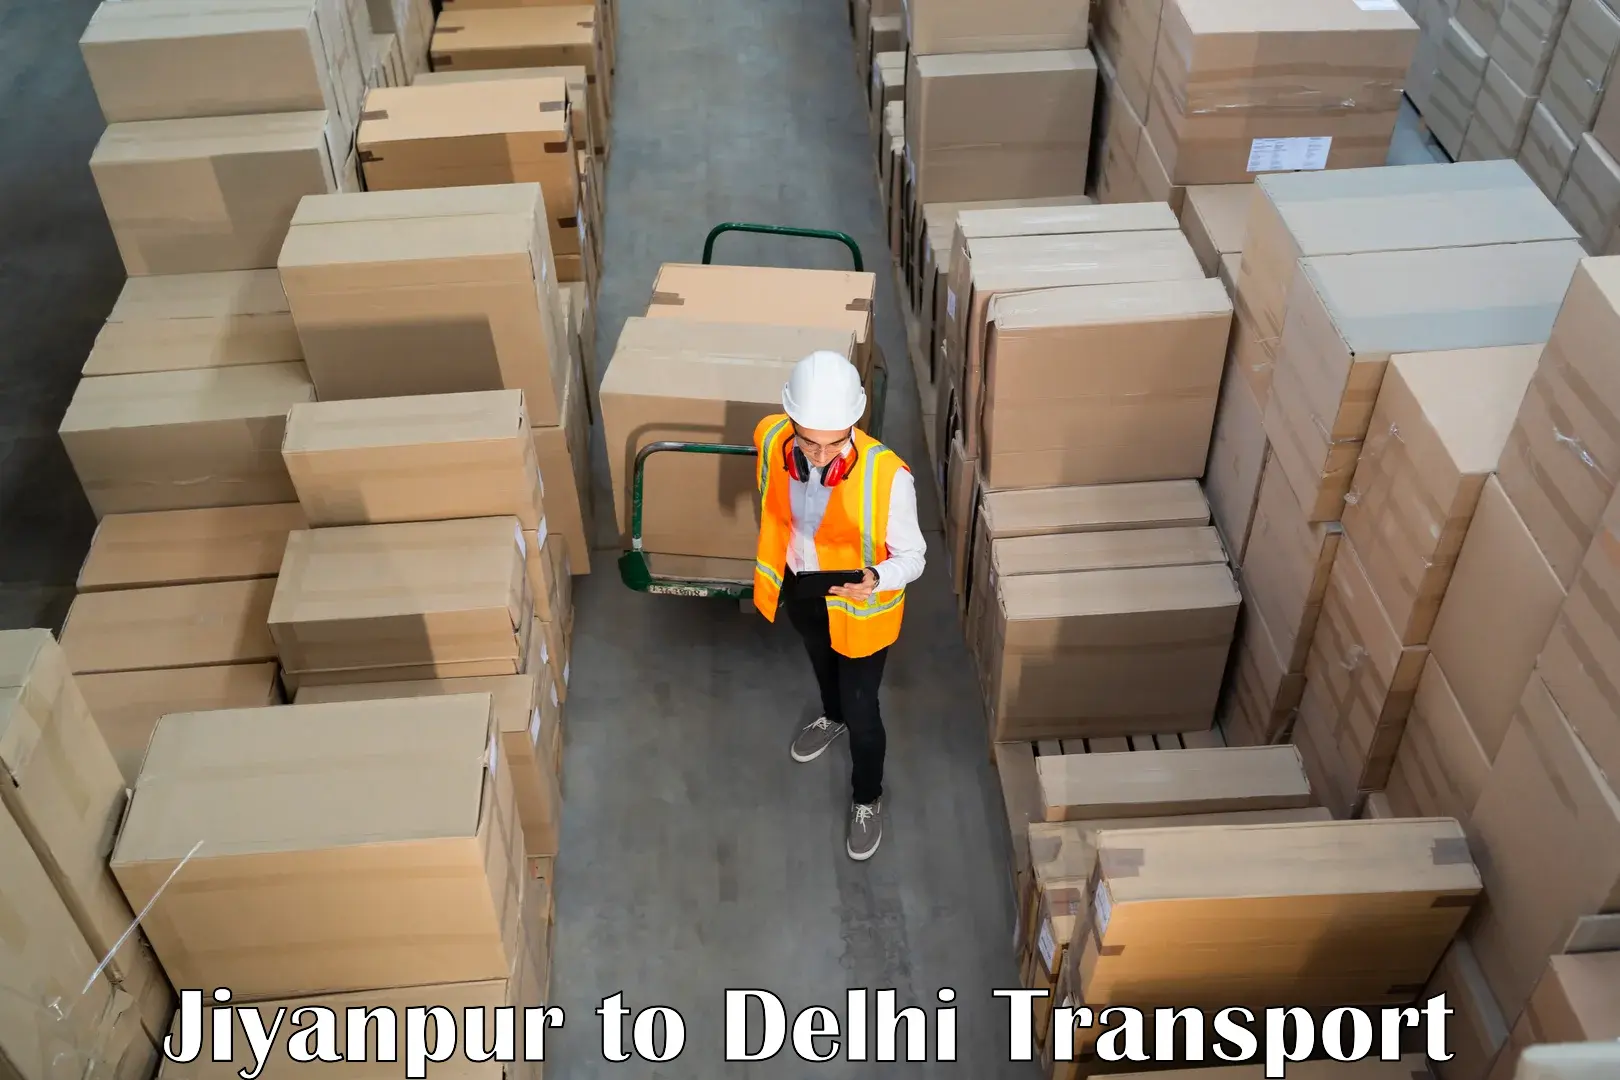 Online transport service Jiyanpur to NCR